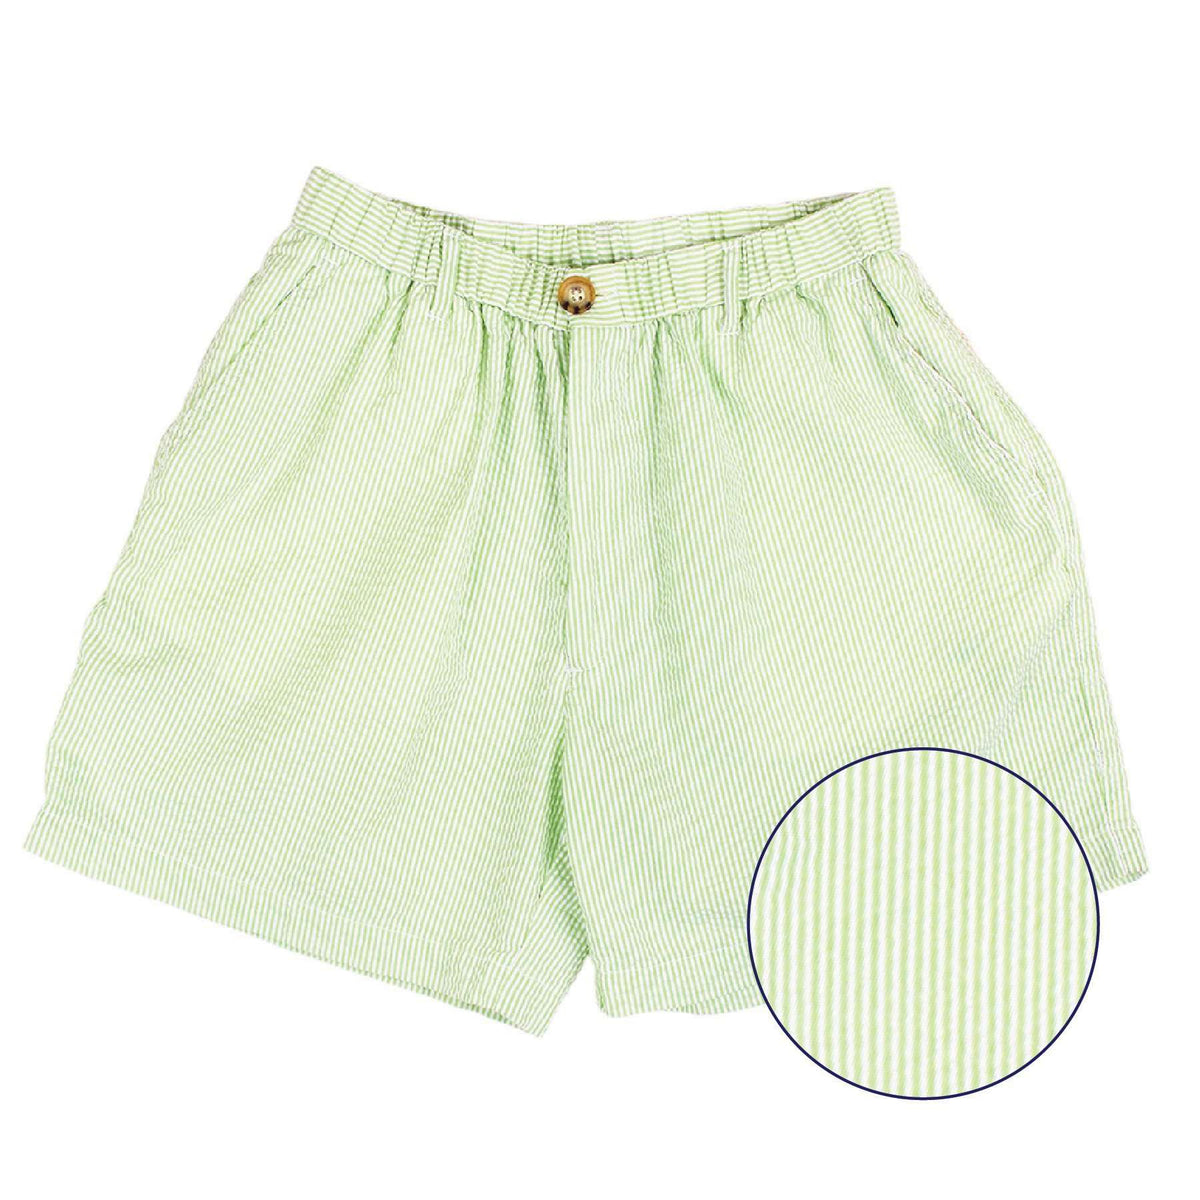 Longshanks 5.5" Seersucker Shorts in Lime Green by Country Club Prep - Country Club Prep